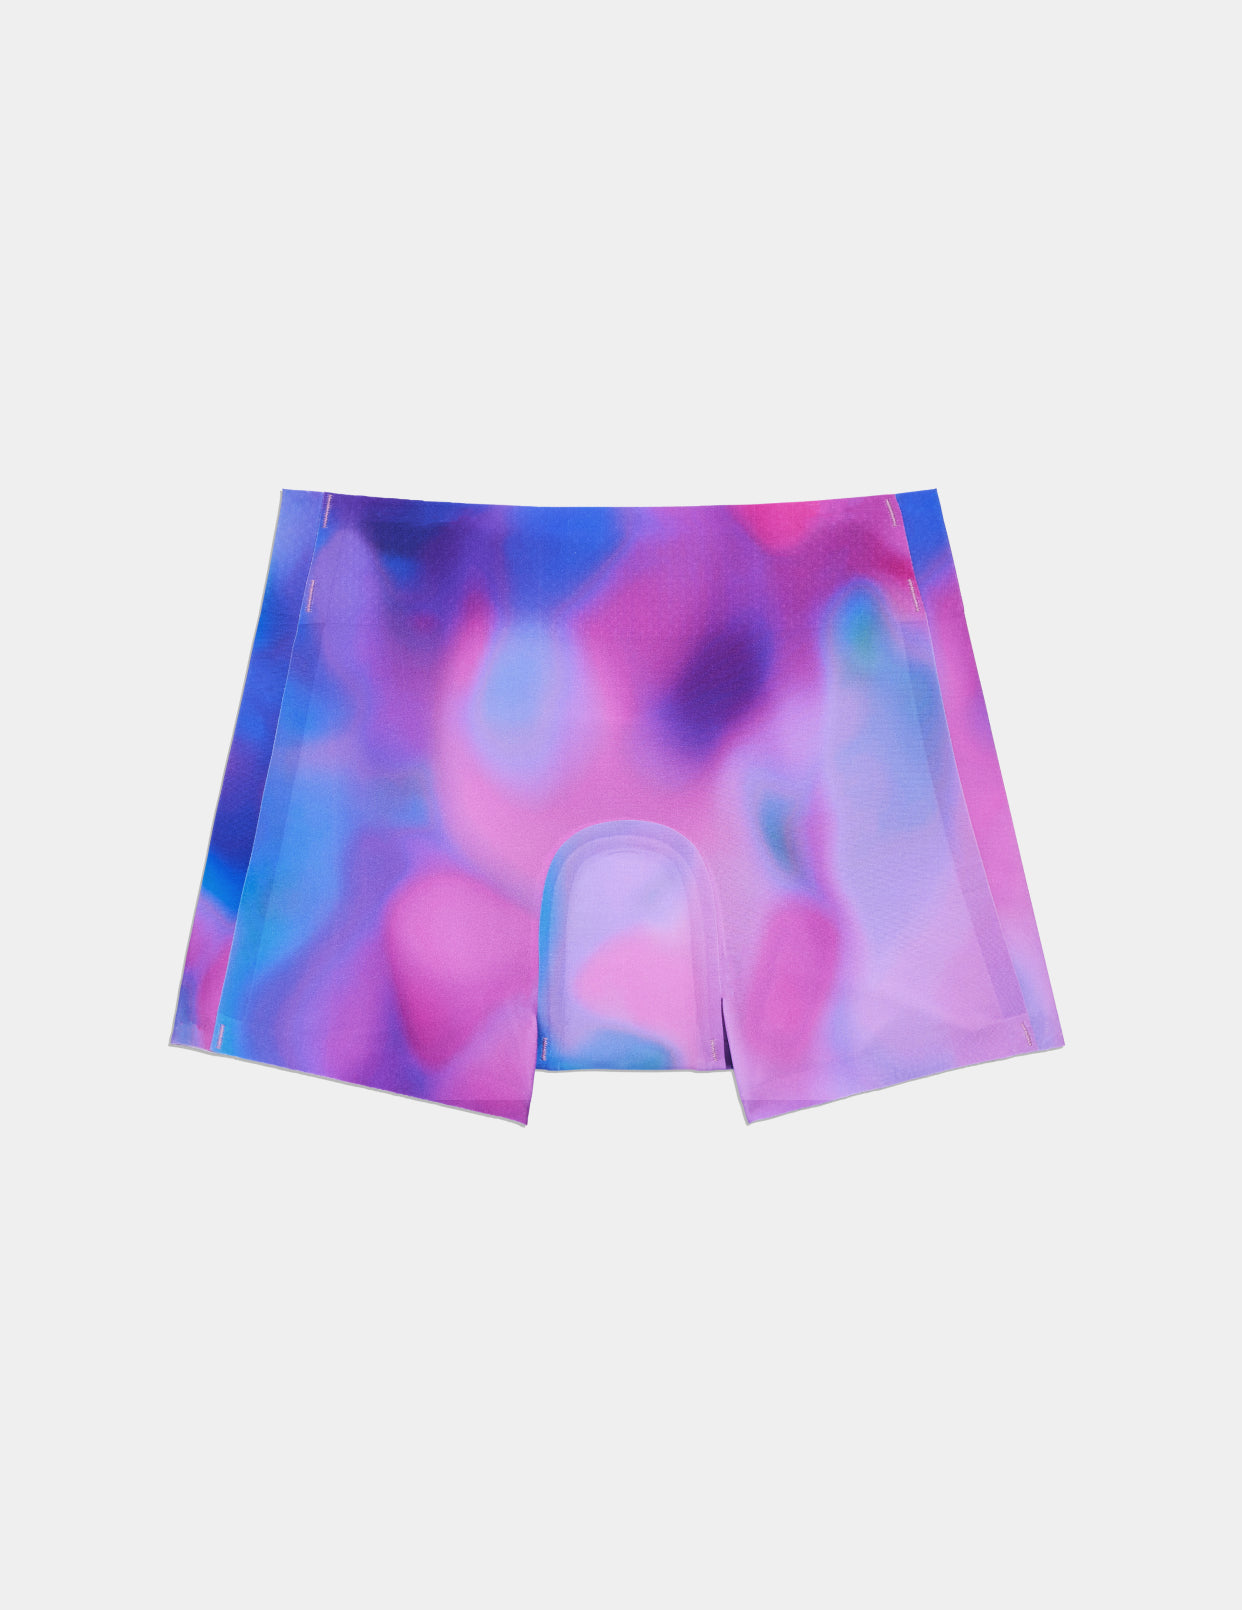 The Sleepover Short - Super Comfortable and absorbent Period